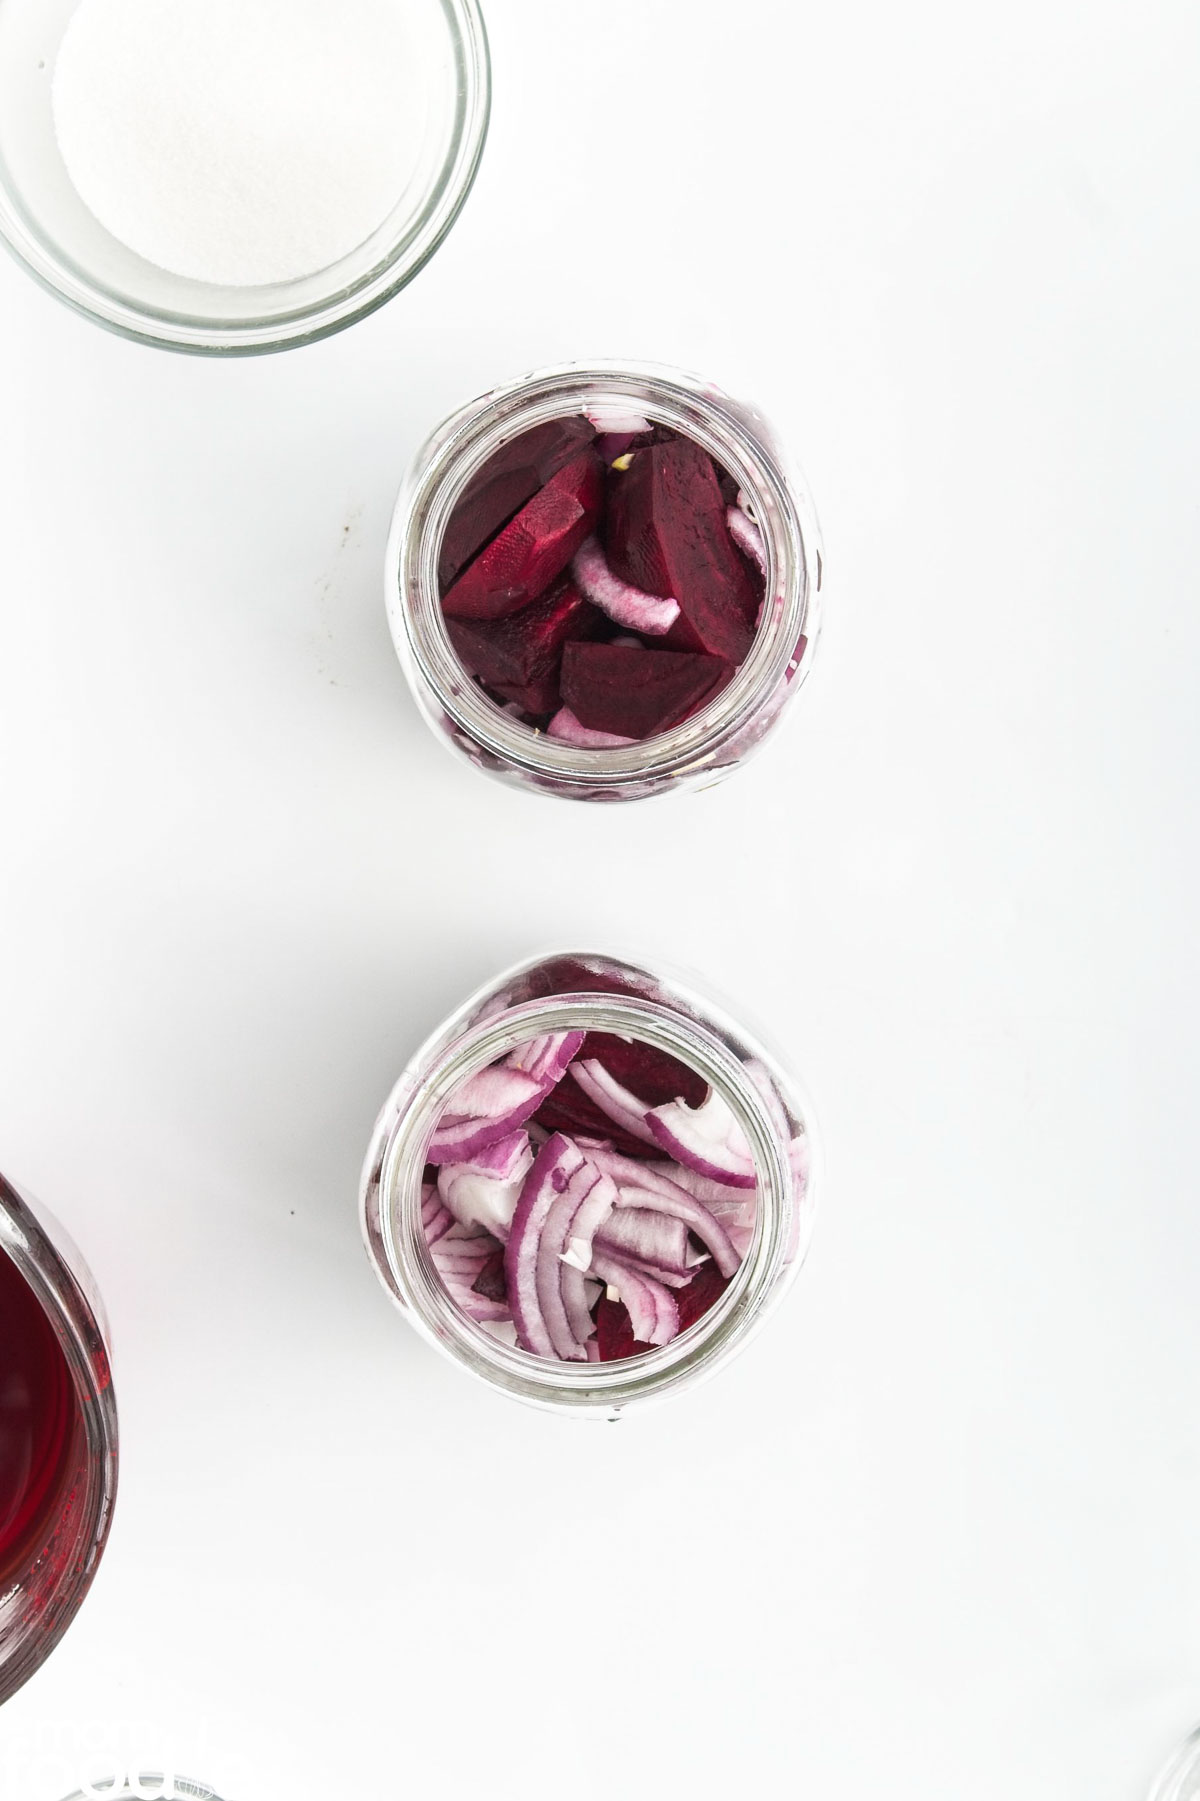 slices of beets with onions packed  into canning jars.